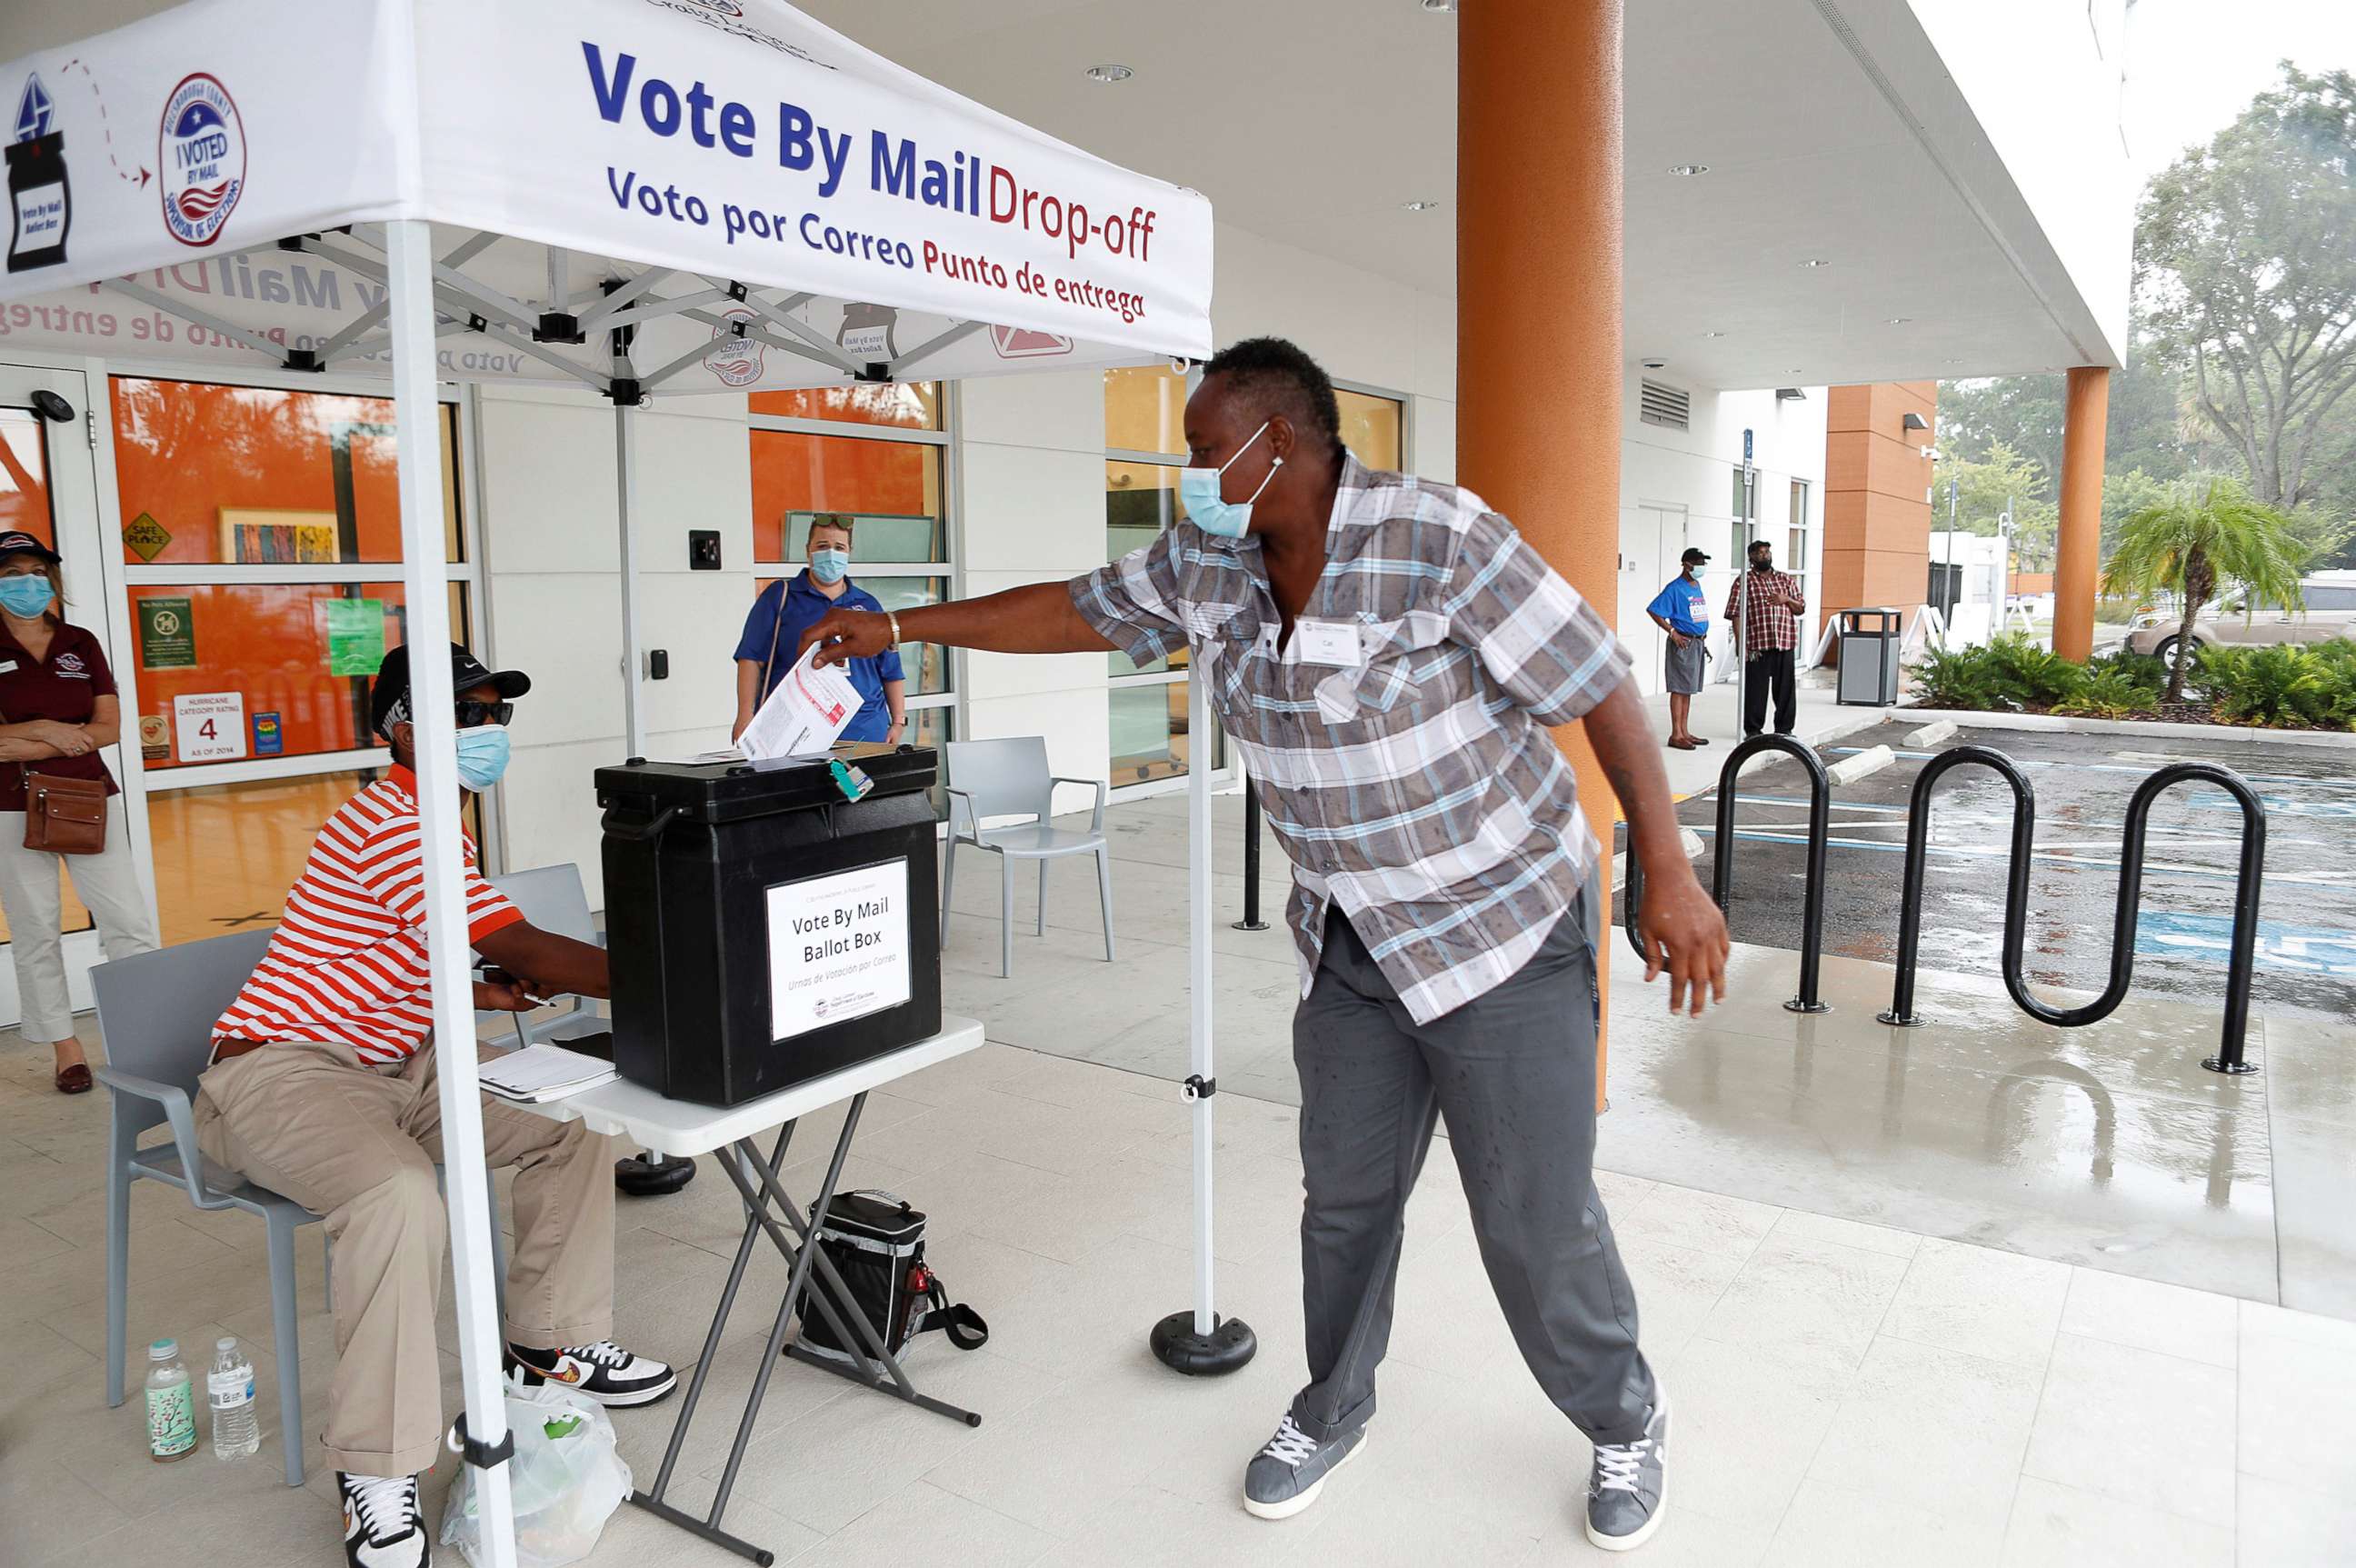 PHOTO: A poll worker casts a mail-in ballot for a disabled driver on the last day of early voting for the U.S. presidential election at the C. Blythe Andrews, Jr. Public Library in East Tampa, Fla., Aug. 16, 2020.